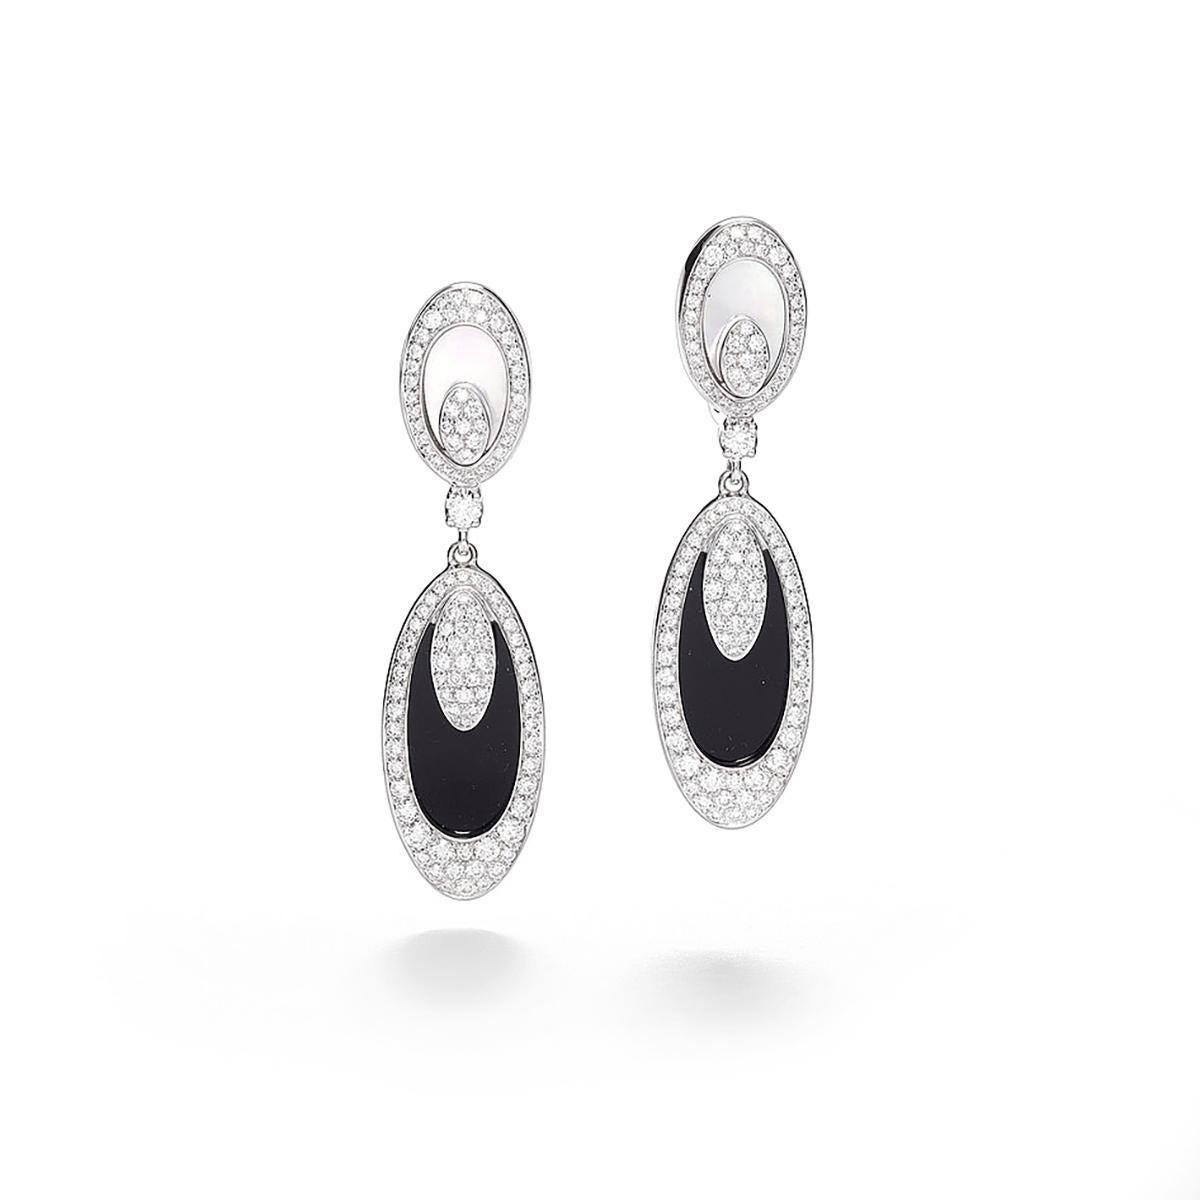 Earrings in 18kt white gold set with 222 diamonds 1.62 cts, 2 onyx 4.86 cts and 2 mother-of-pearl 1.19 cts        